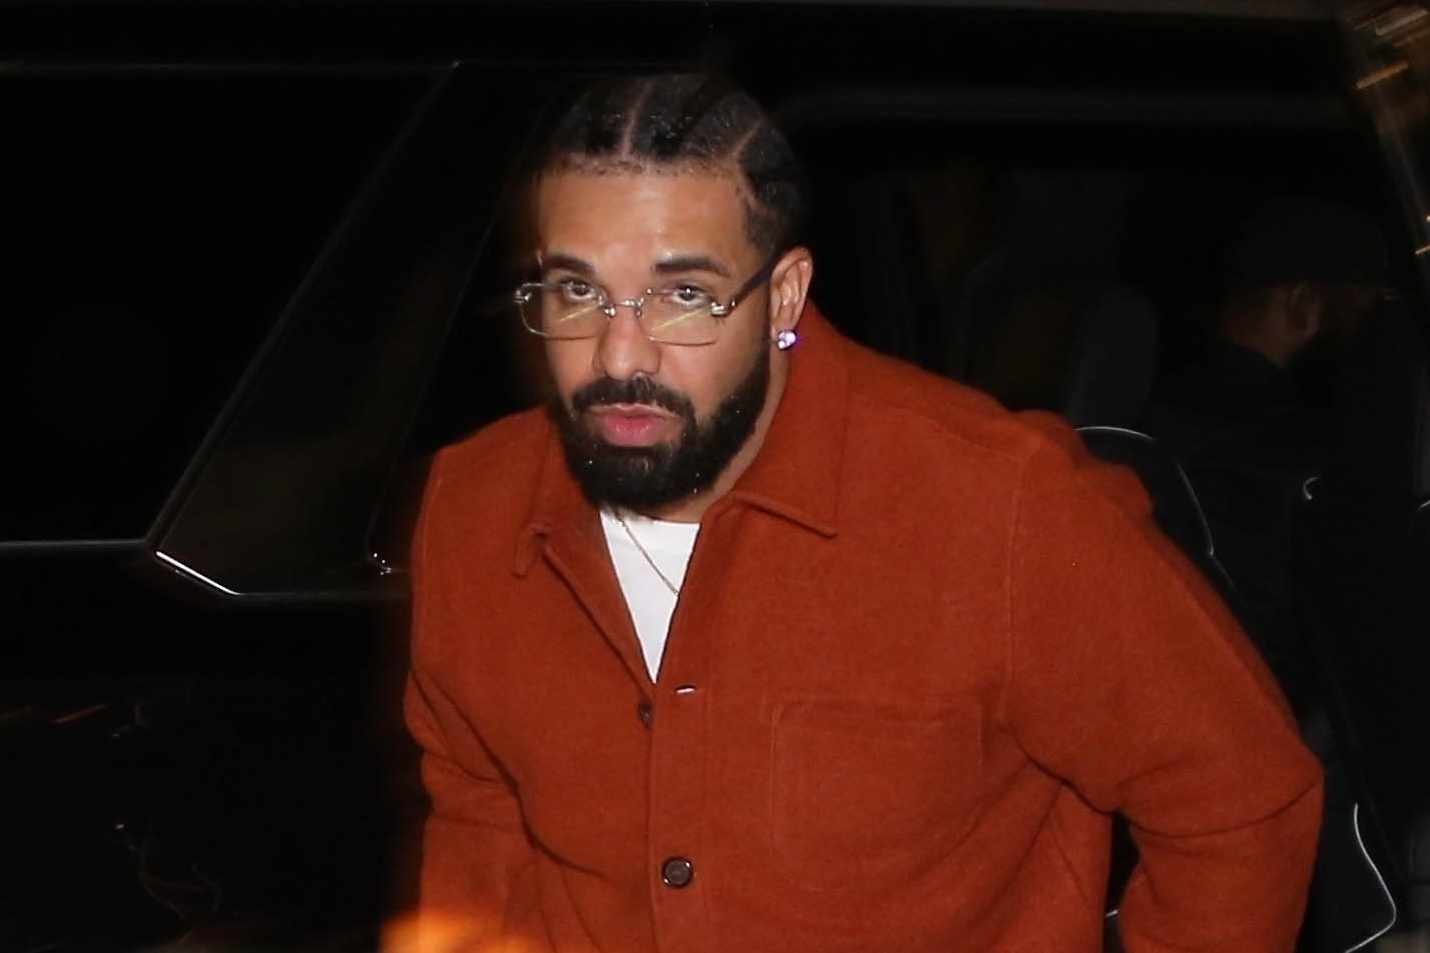 Drake wears a red shirt over white pants with thin-rimmed glasses on a night out in Los Angeles